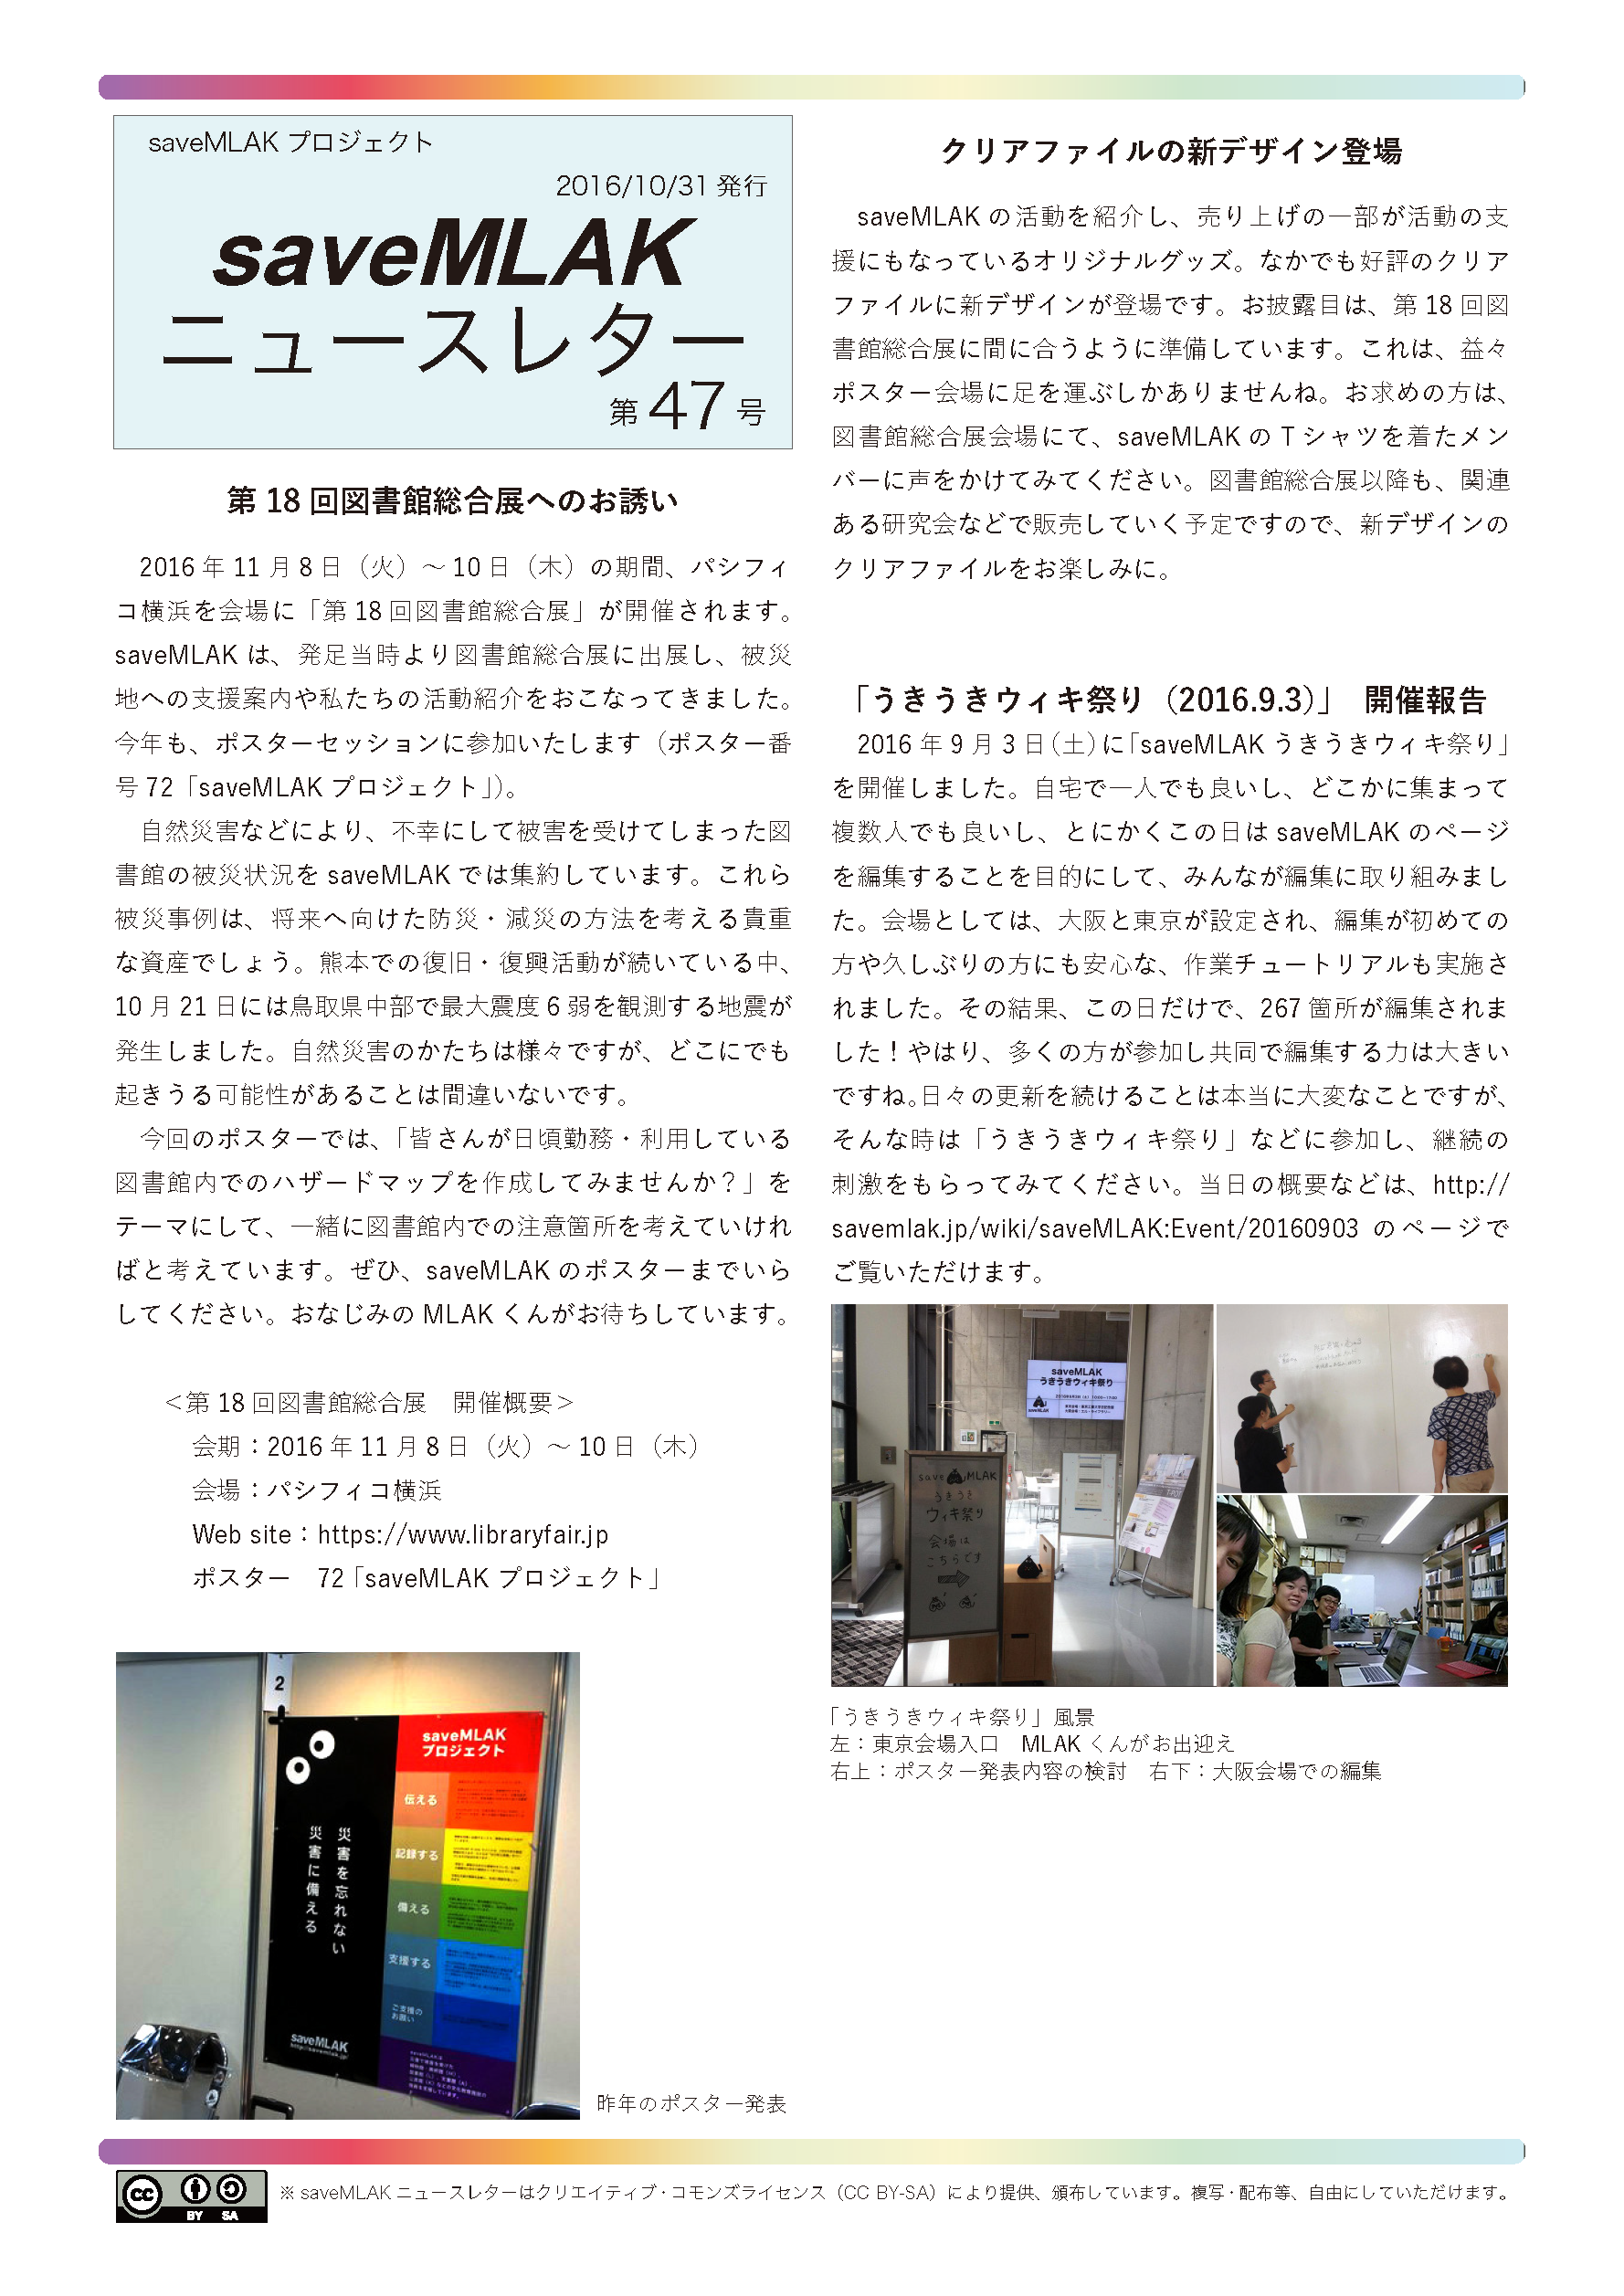 saveMLAK Newsletter 201609and10 ページ 1.png